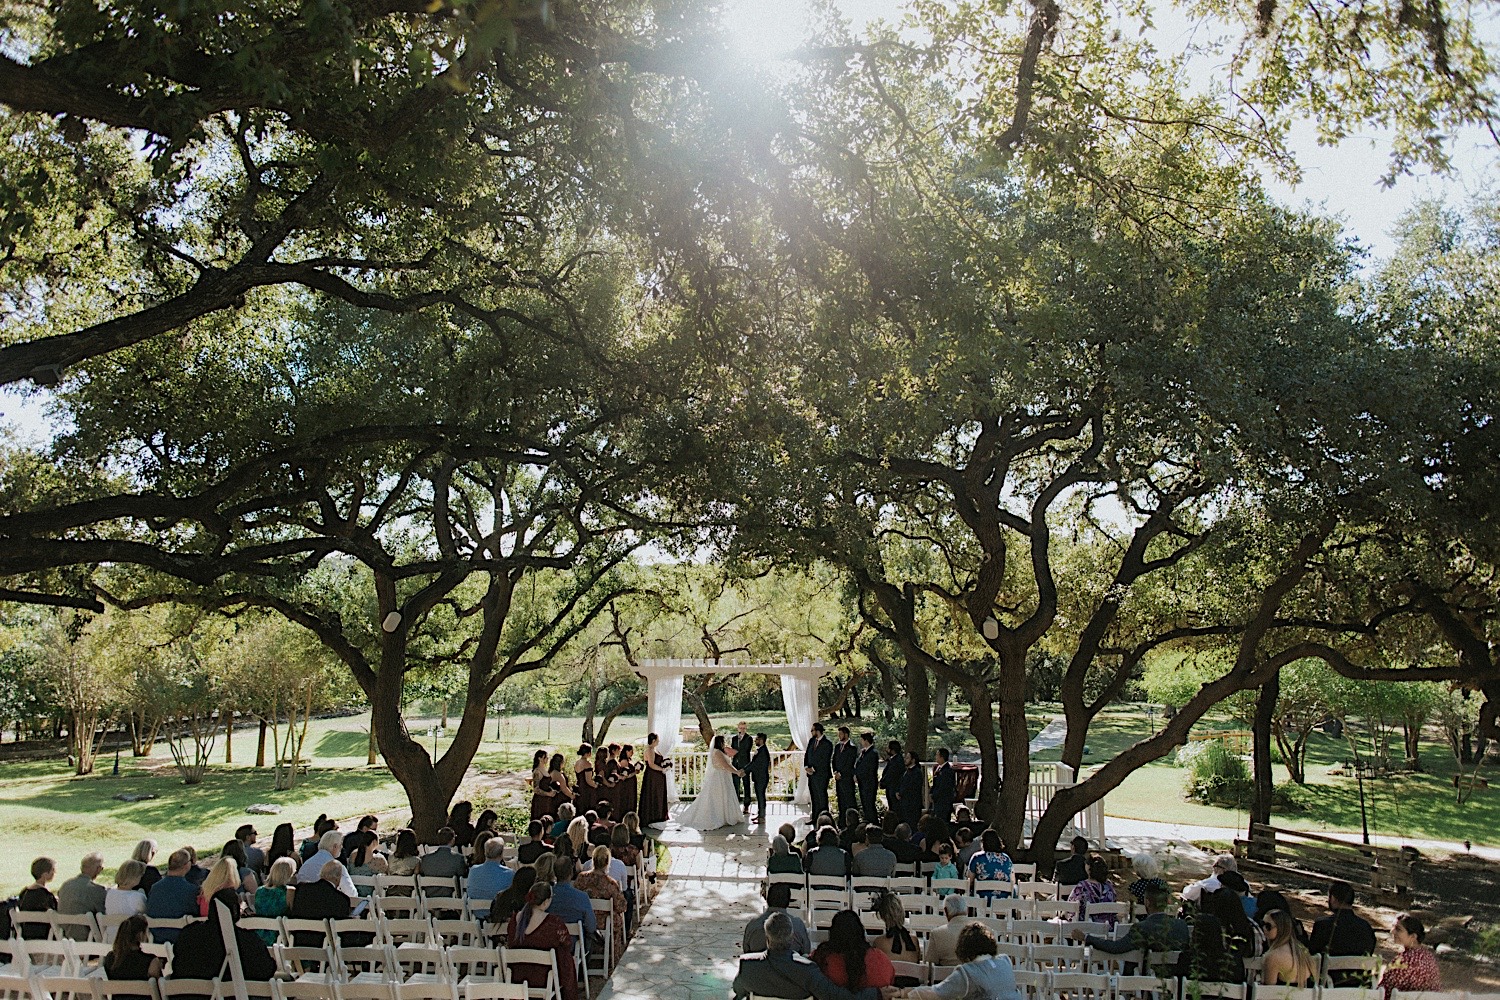 A wedding ceremony takes place outdoors underneath the cover of large trees in a park